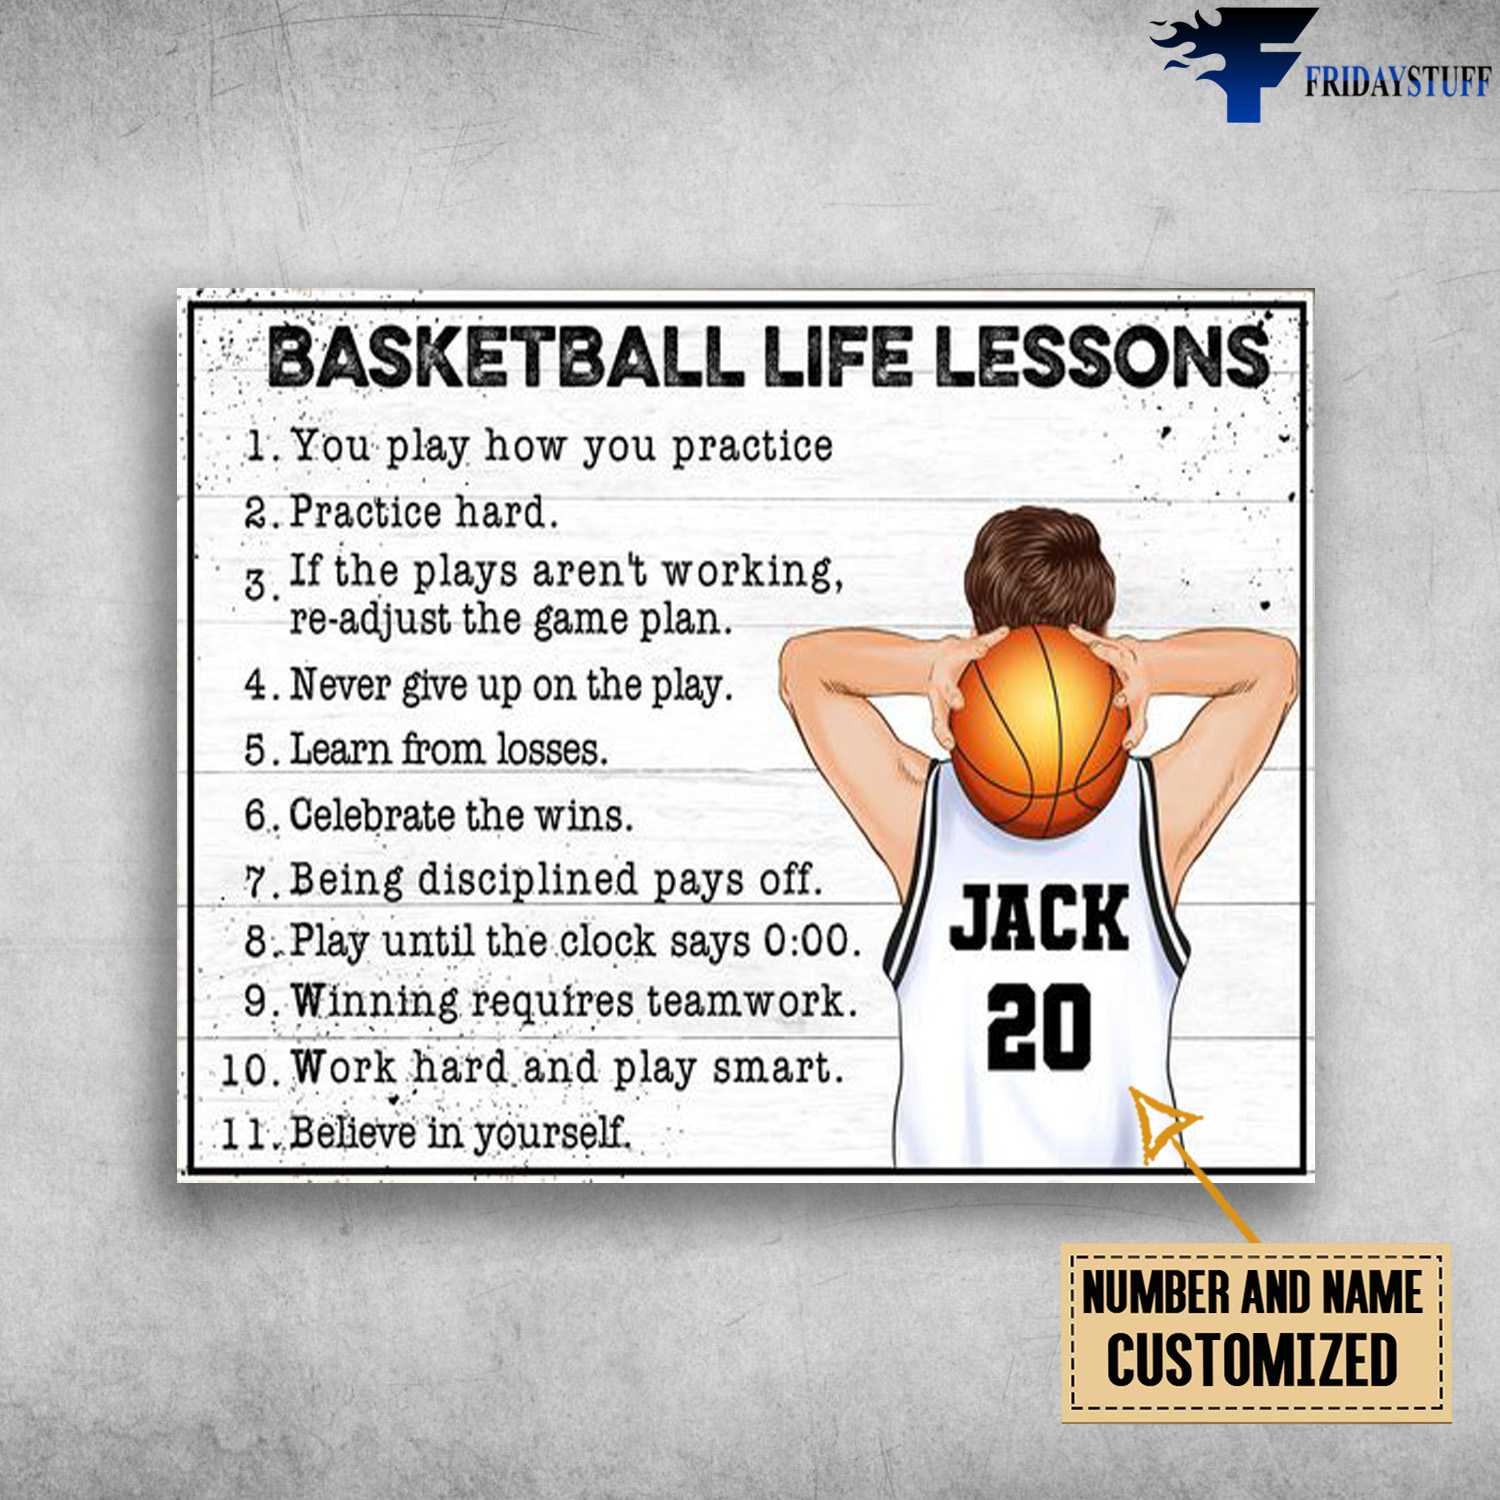 Basketball Life Lessons, Basketball Lover, You Play How You Practice, Practice Hard, Never Give Up On The Play, Celebrate The Wins